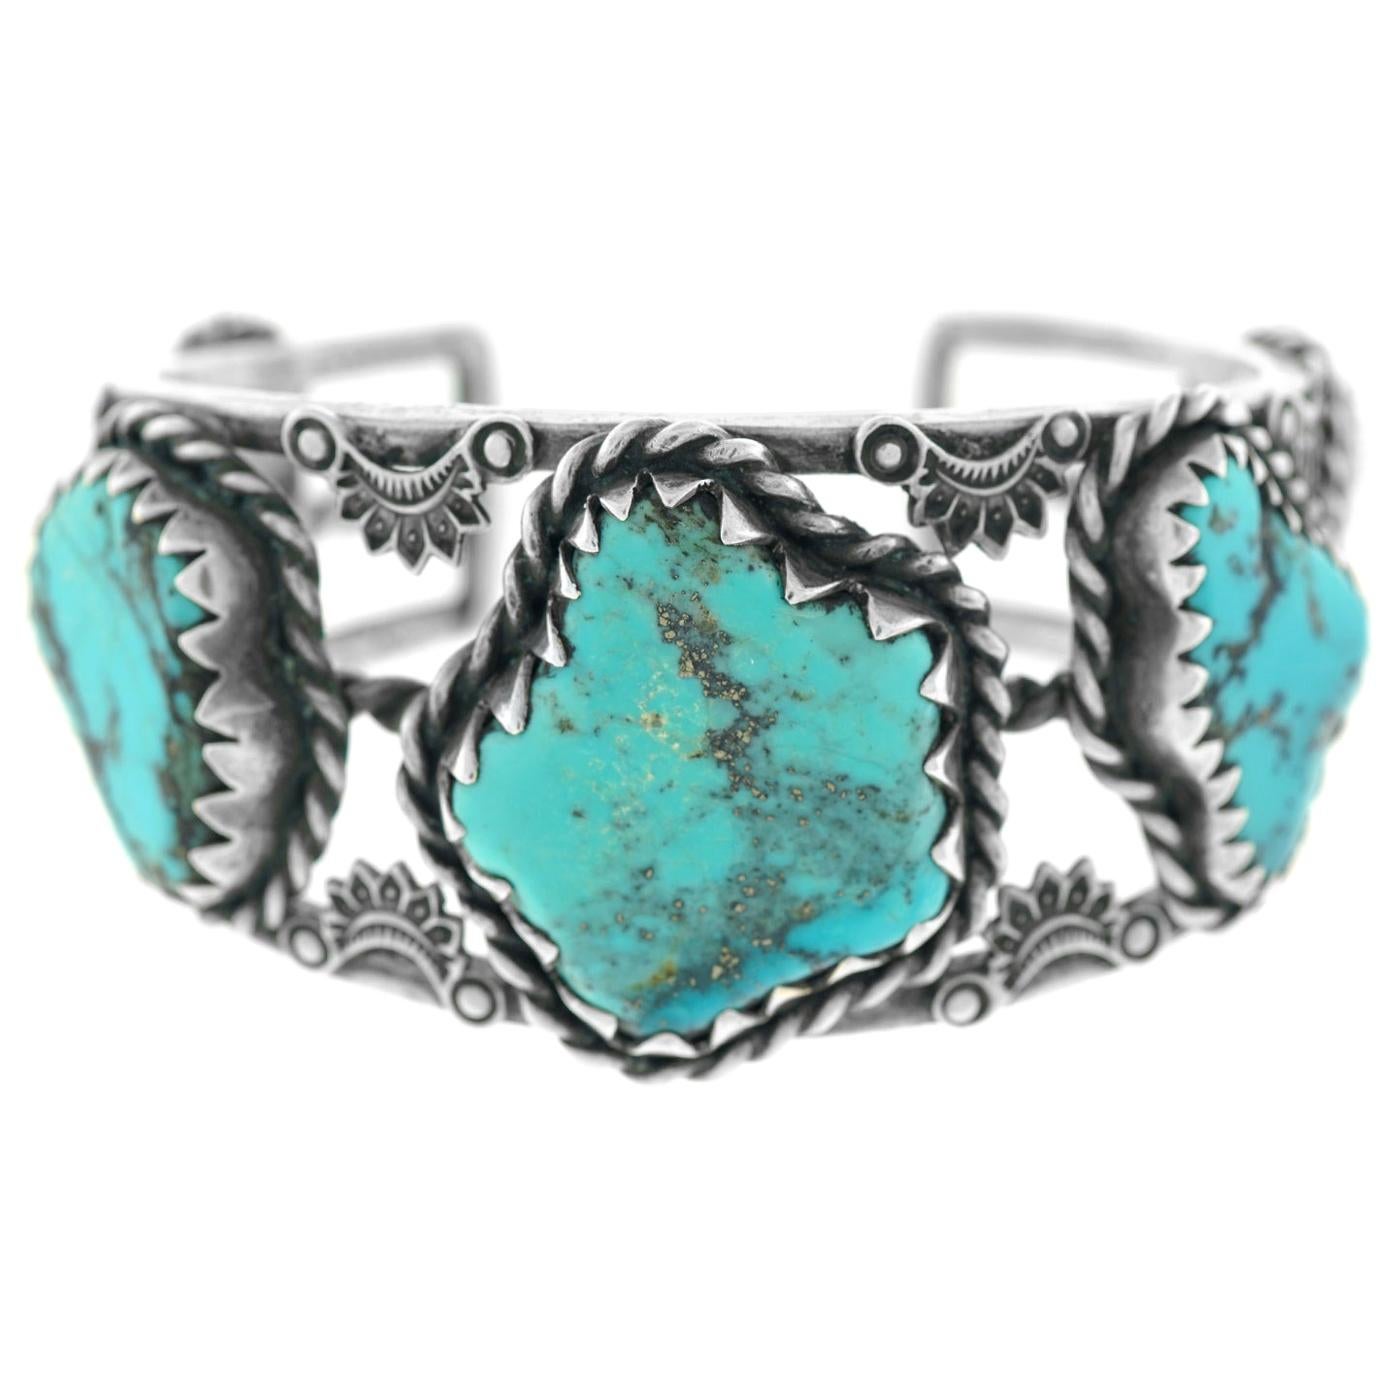 Navajo Sterling Openwork Cuff with Five Large Turquoise Stones